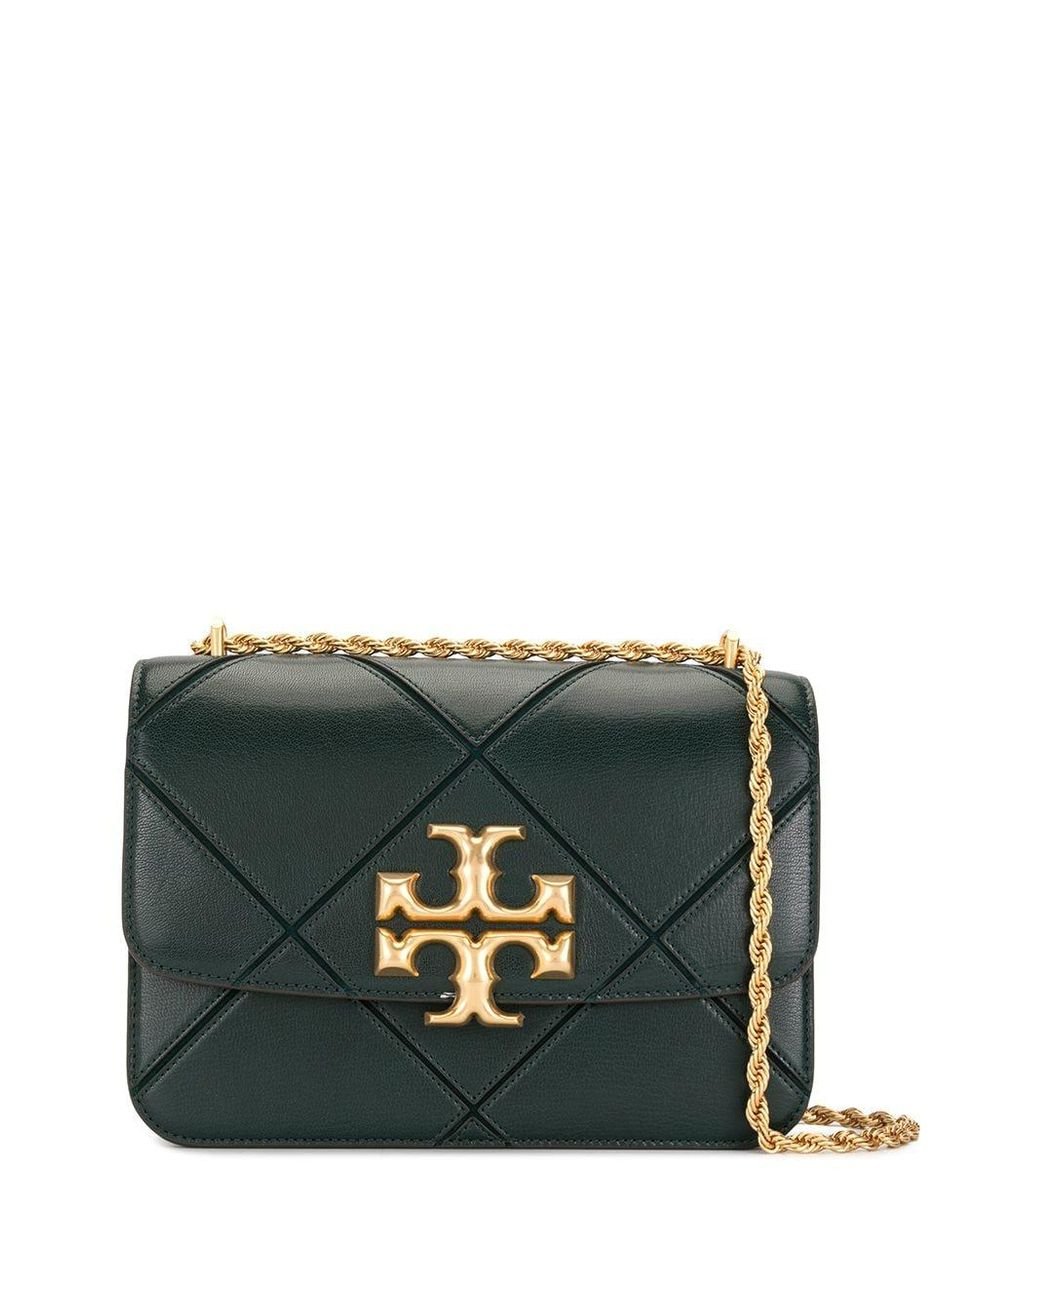 Tory Burch Leather Eleanor Quilted Crossbody Bag in Green - Lyst